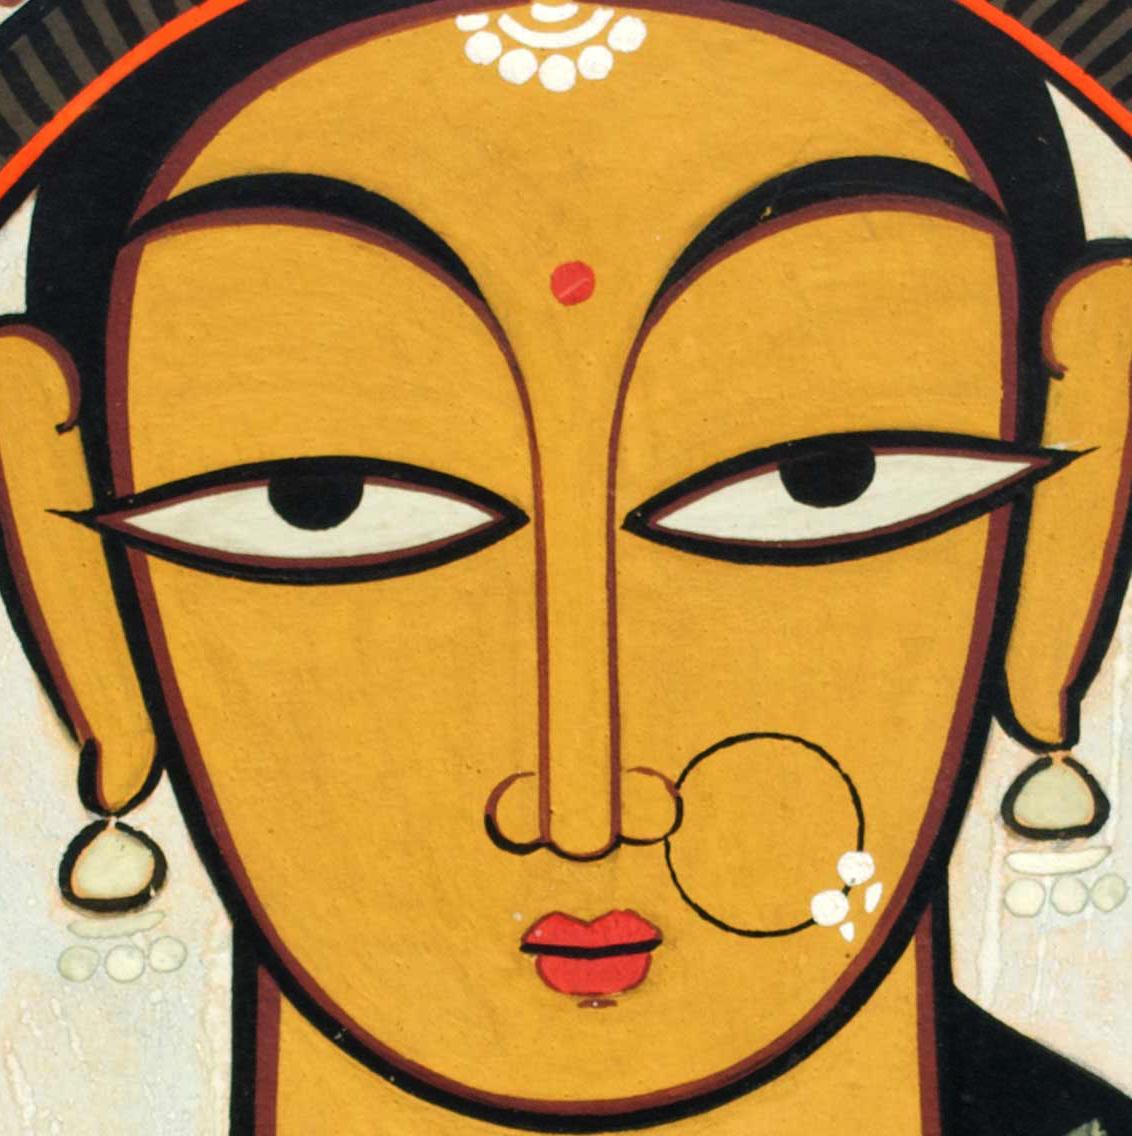 'Untitled (Woman)' original painting on paper by Jamini Roy 1